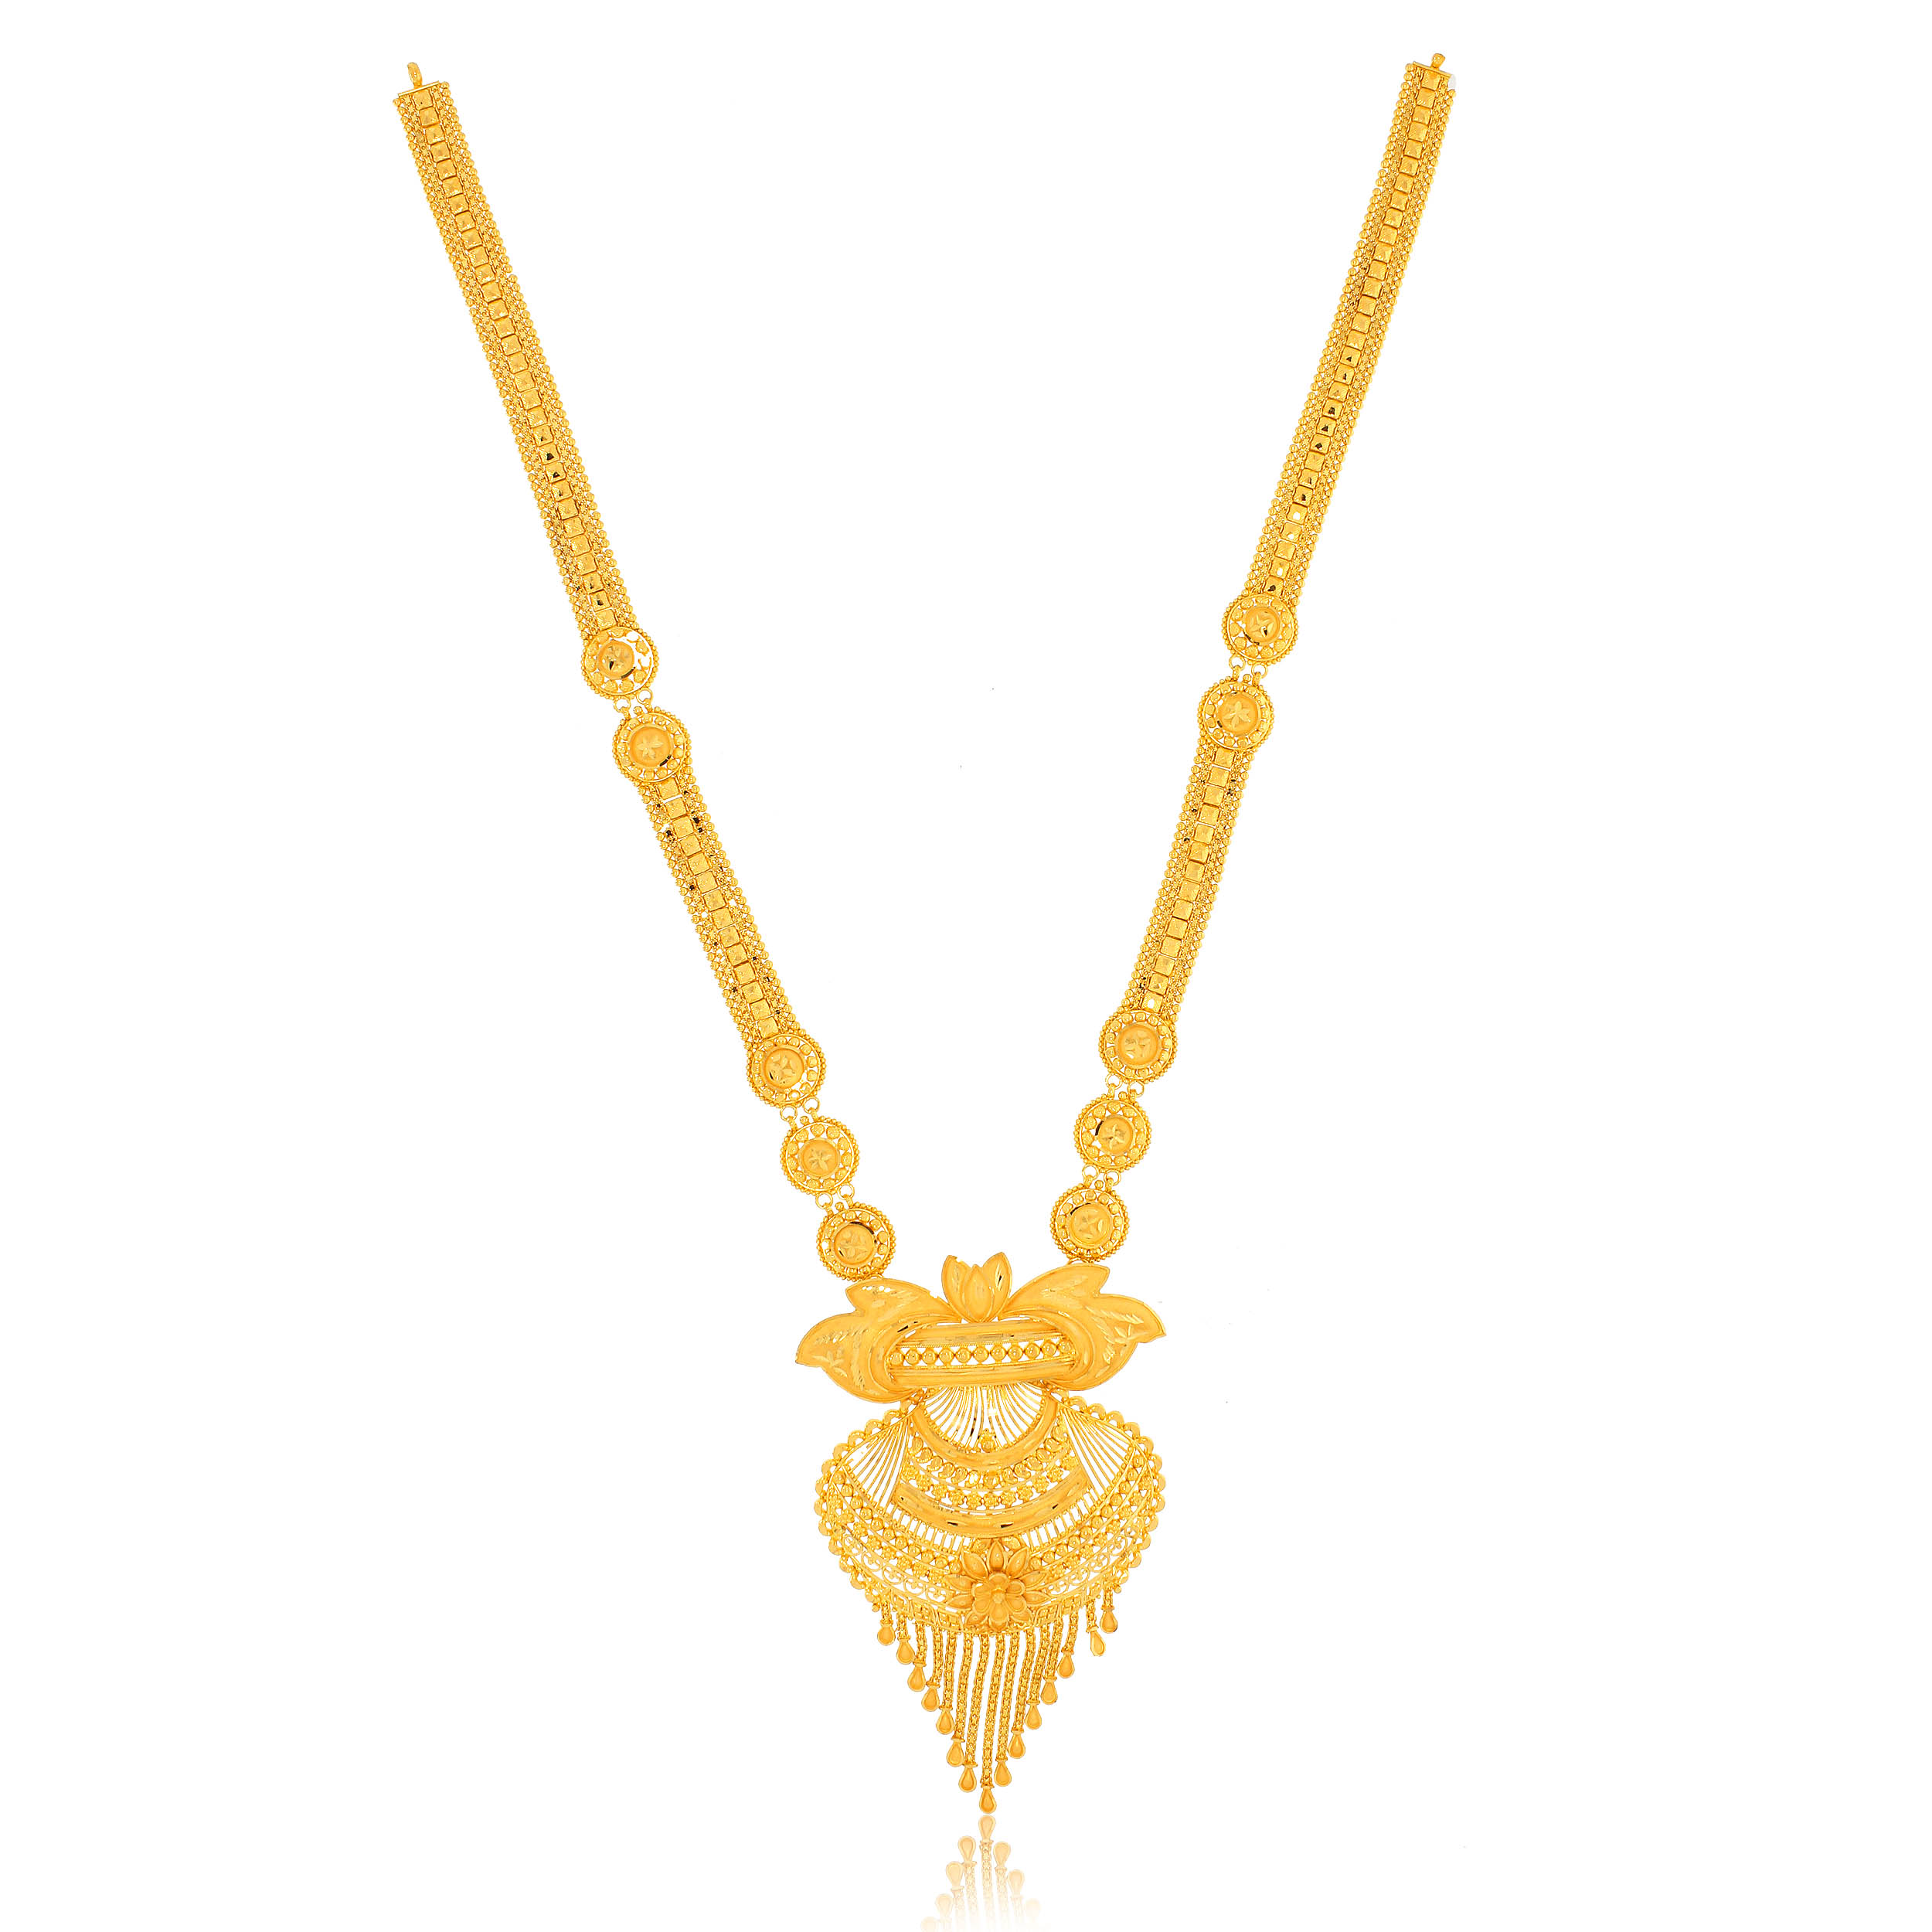 SAIL AABI JEWELS 22CT BIS HALLMARK GOLD LONG  NECKLACE FOR WOMAN